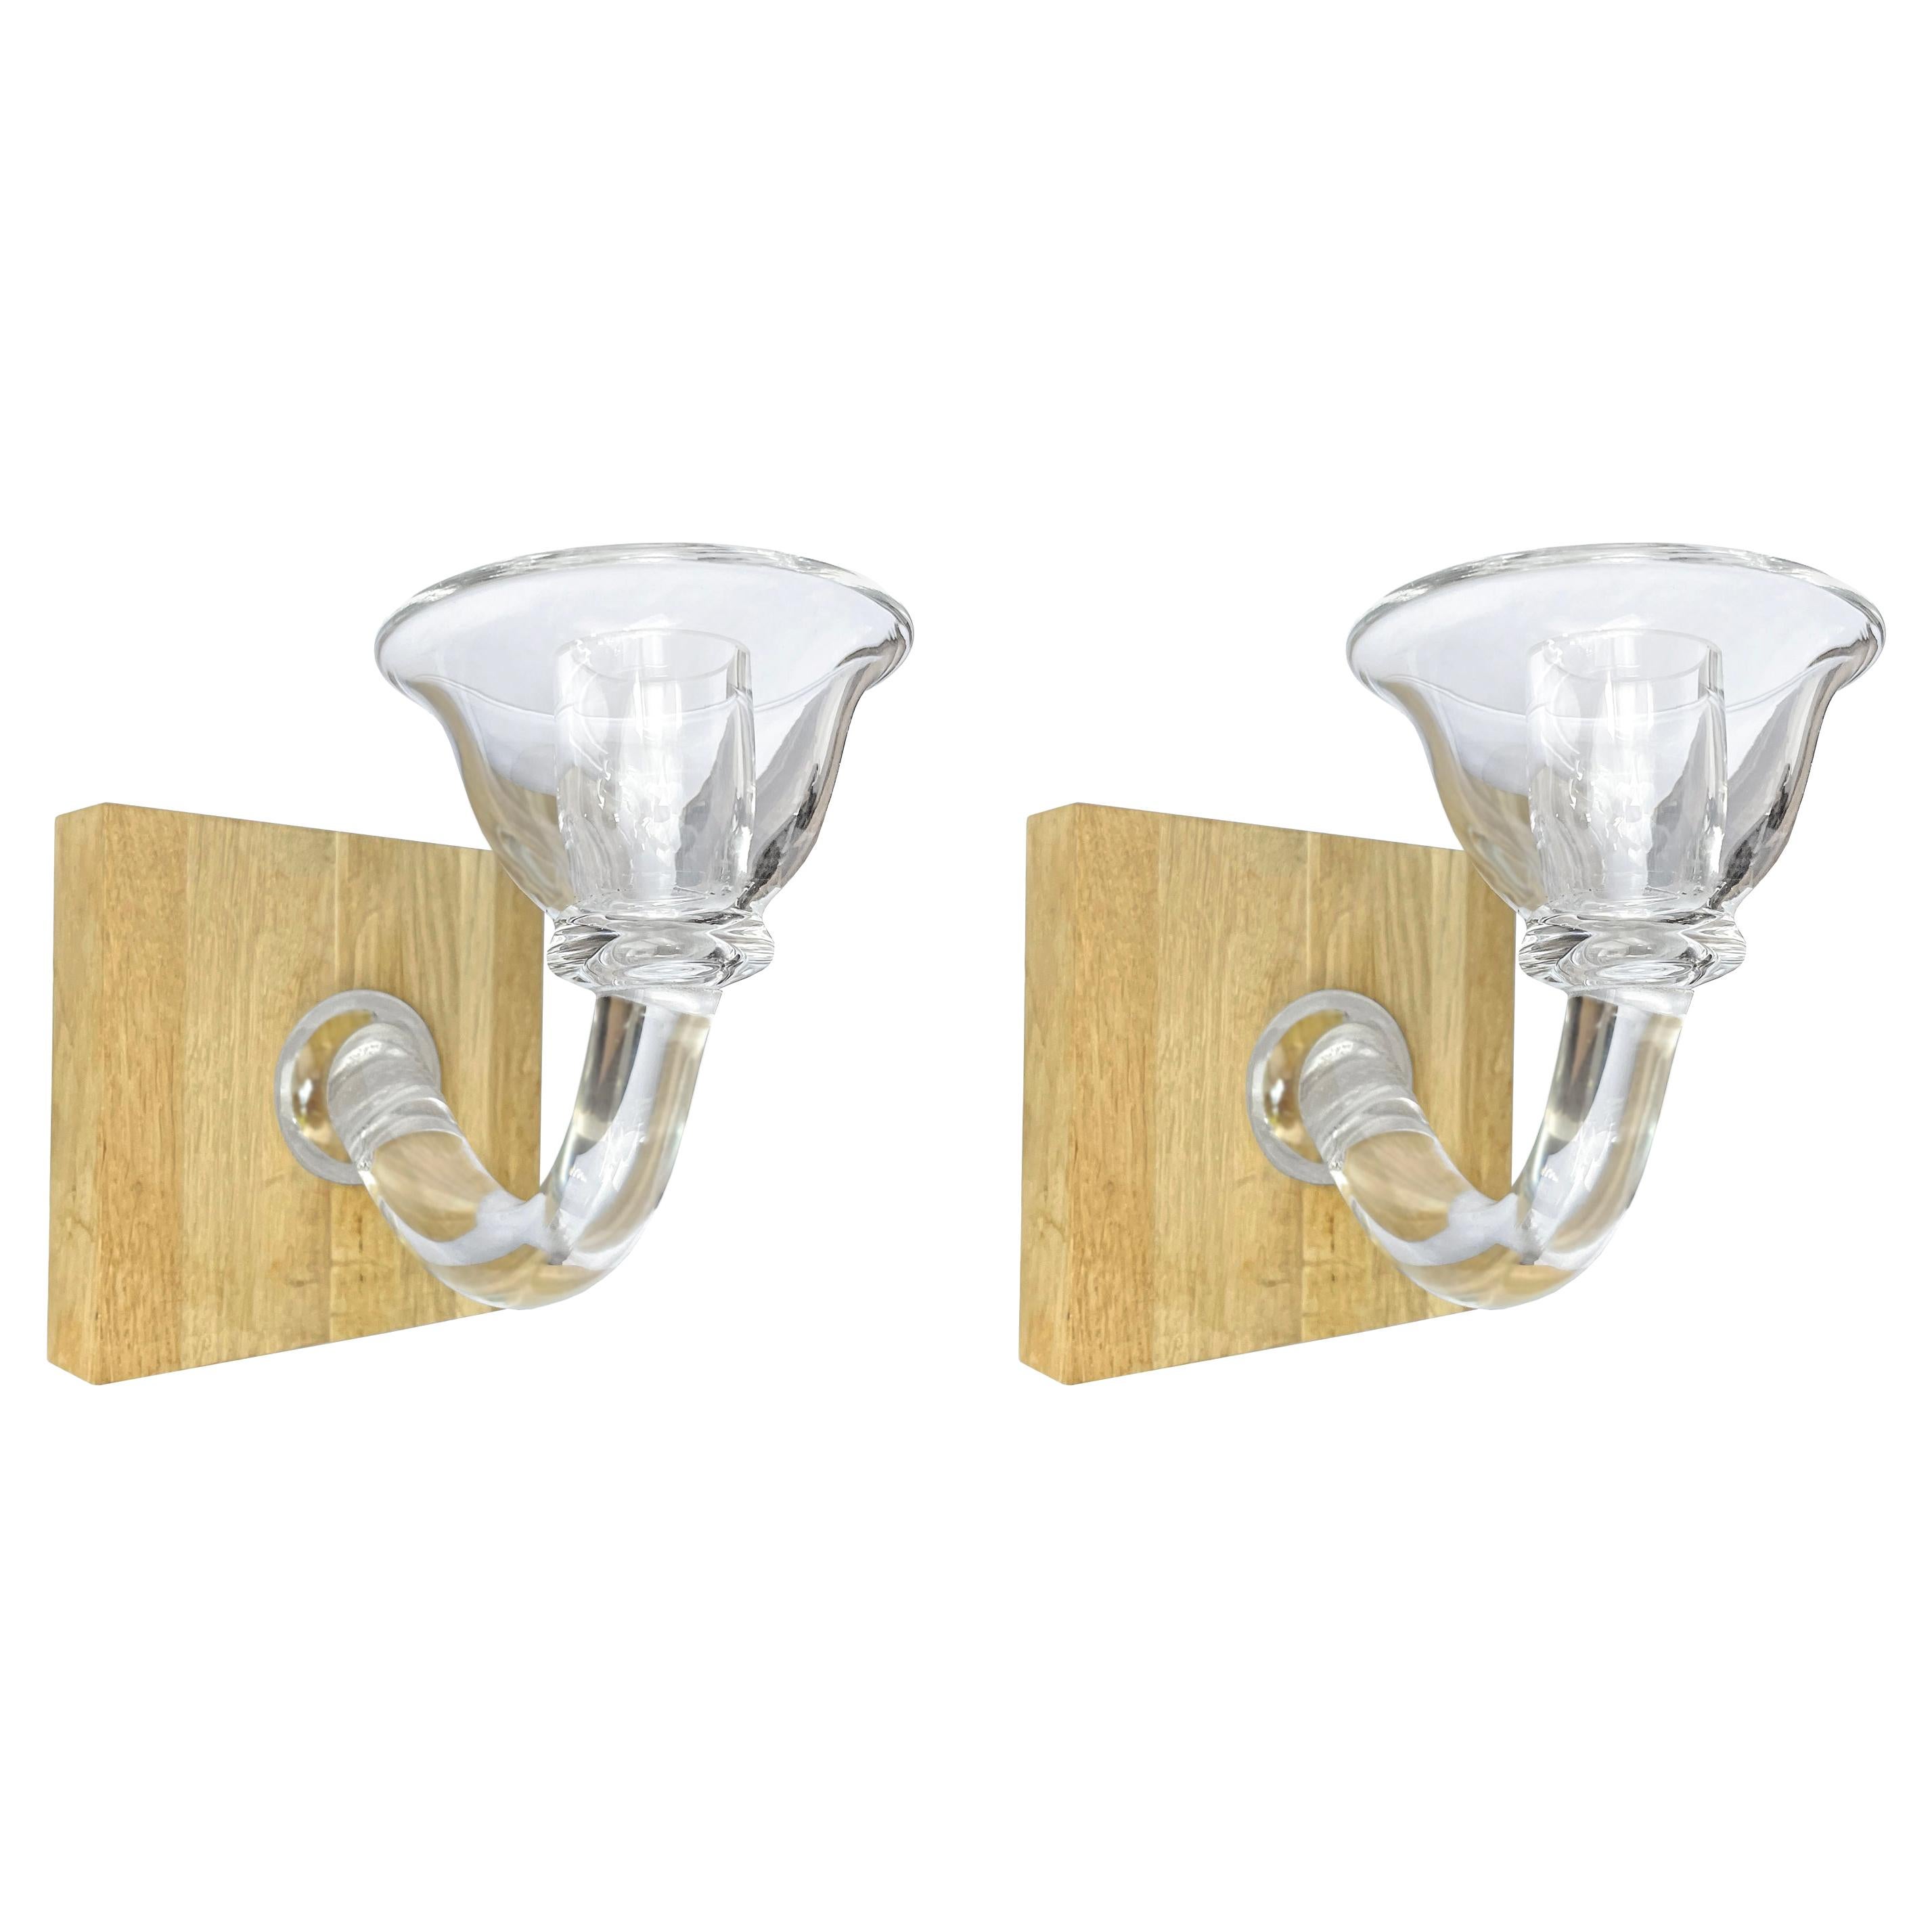 Pair of Handblown Glass Candle Sconces